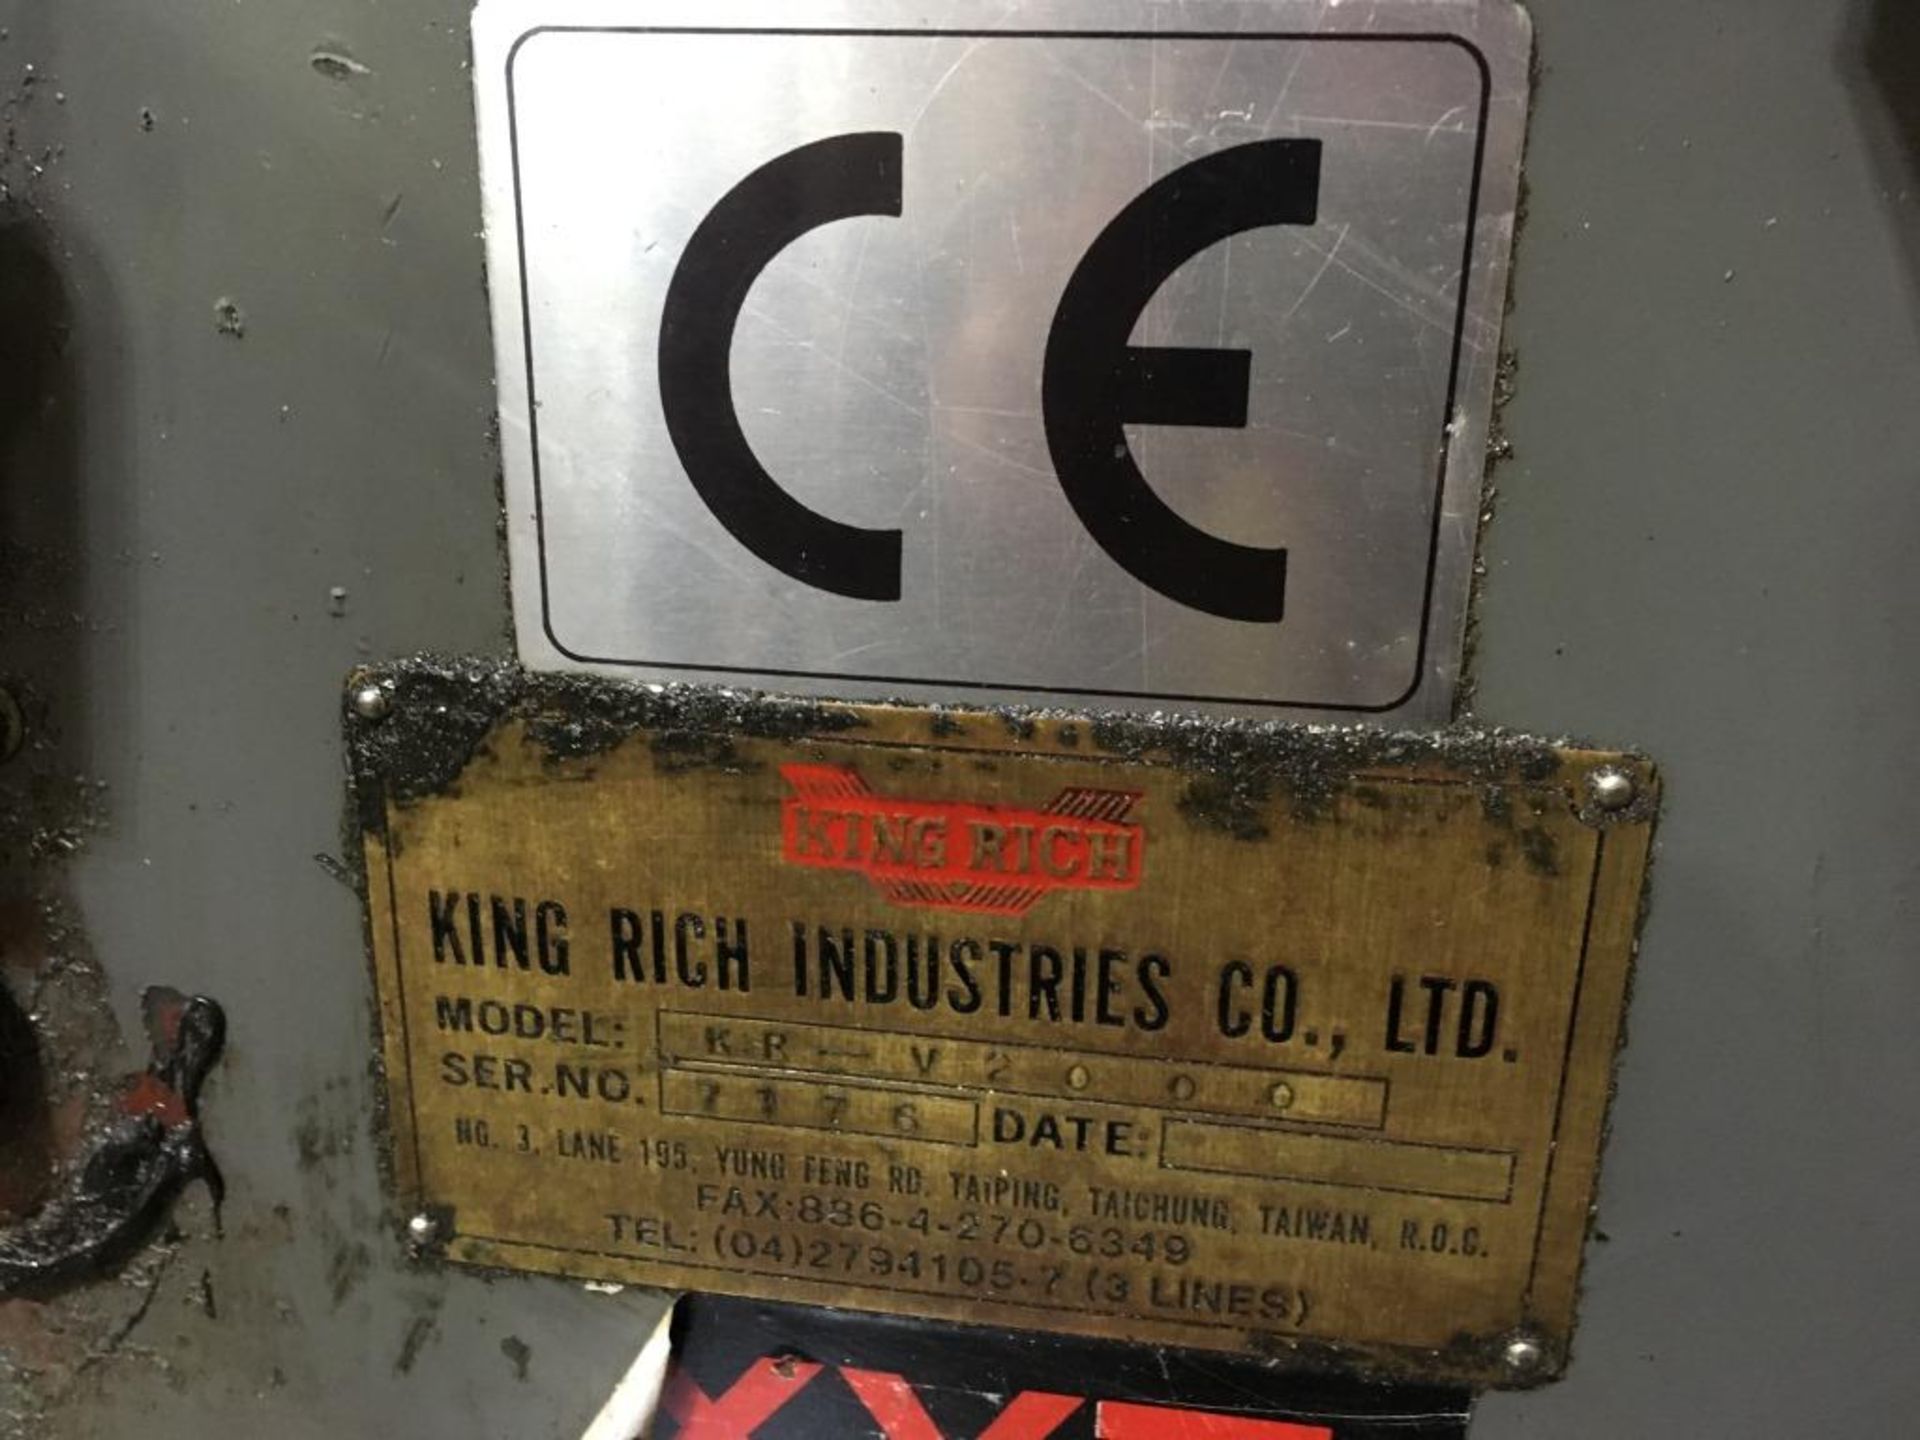 King Rich Industries Co turret milling machine, KR - V2000 Pro 2000, Serial No. 7176, with Proto - Image 7 of 7